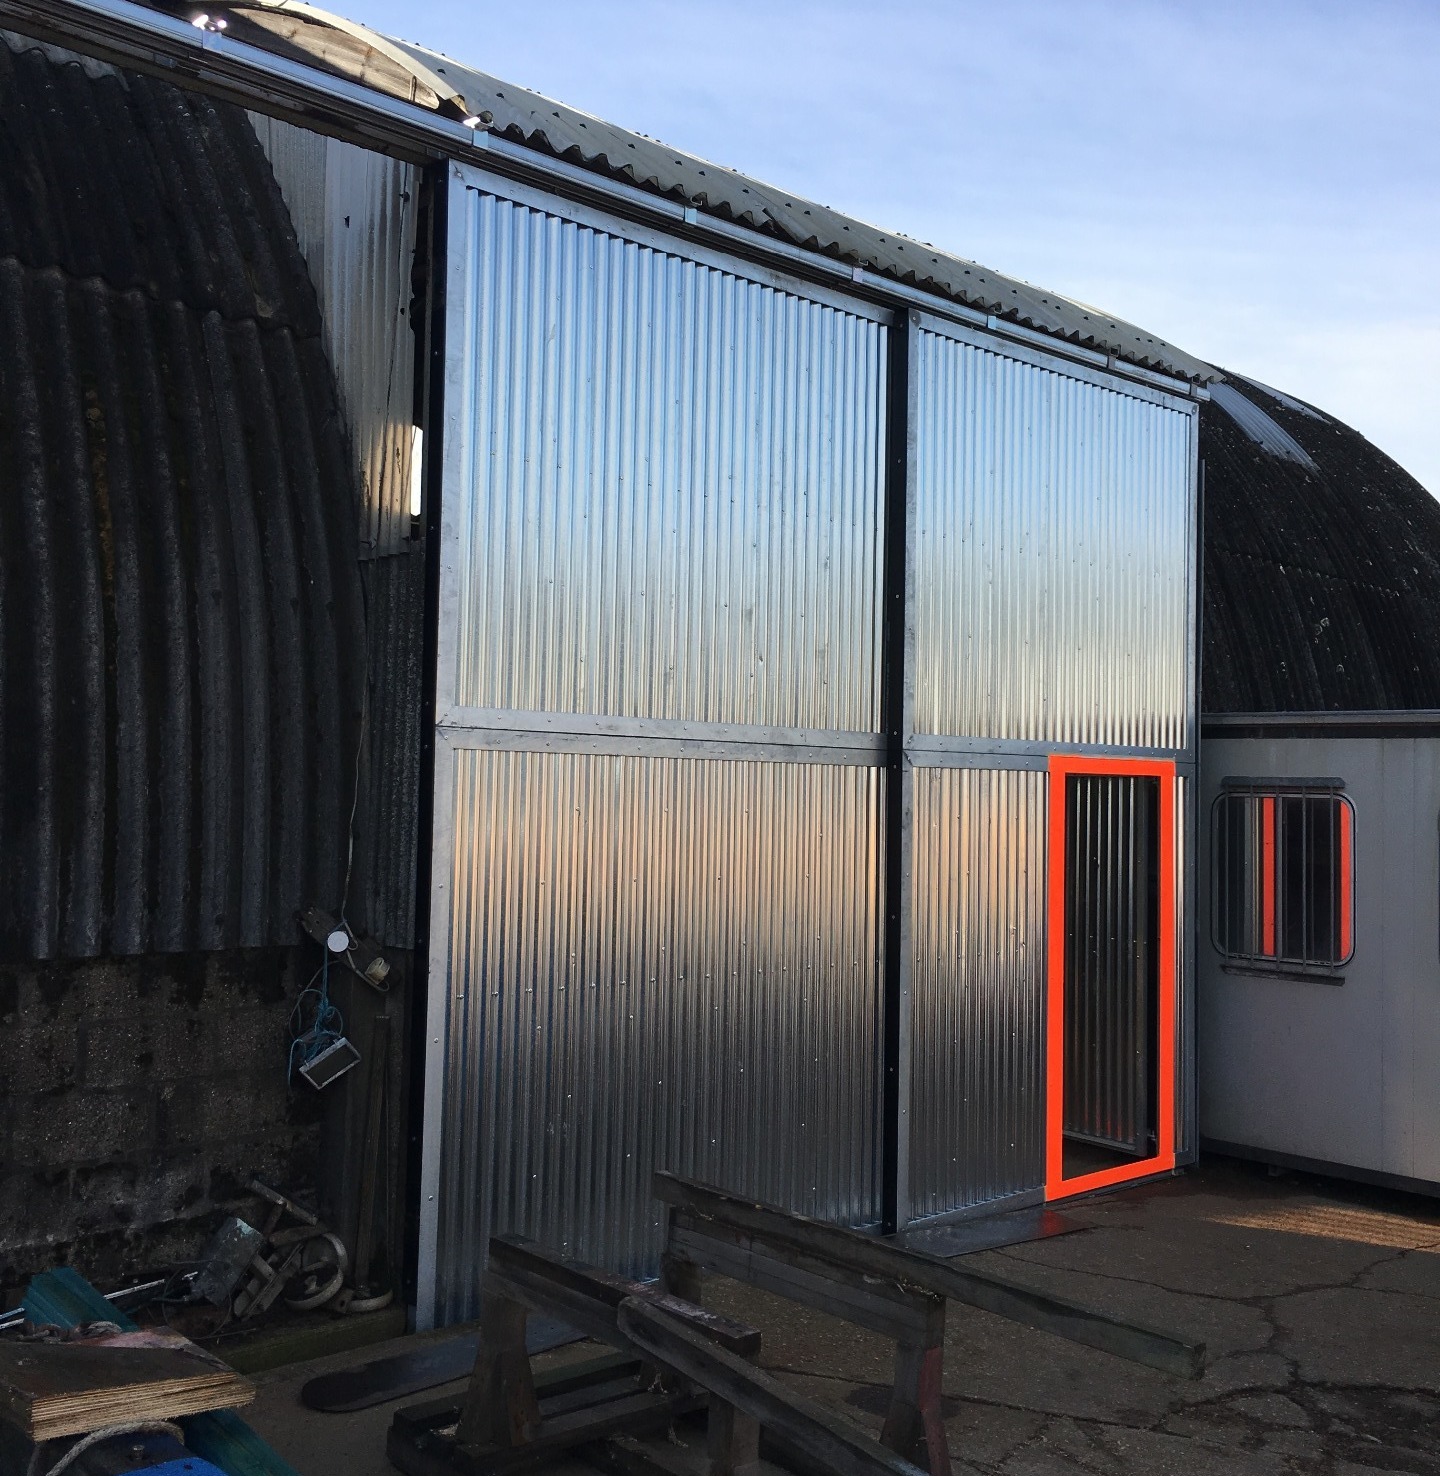 Metal sheet walls with an orange rimmed door for easy access